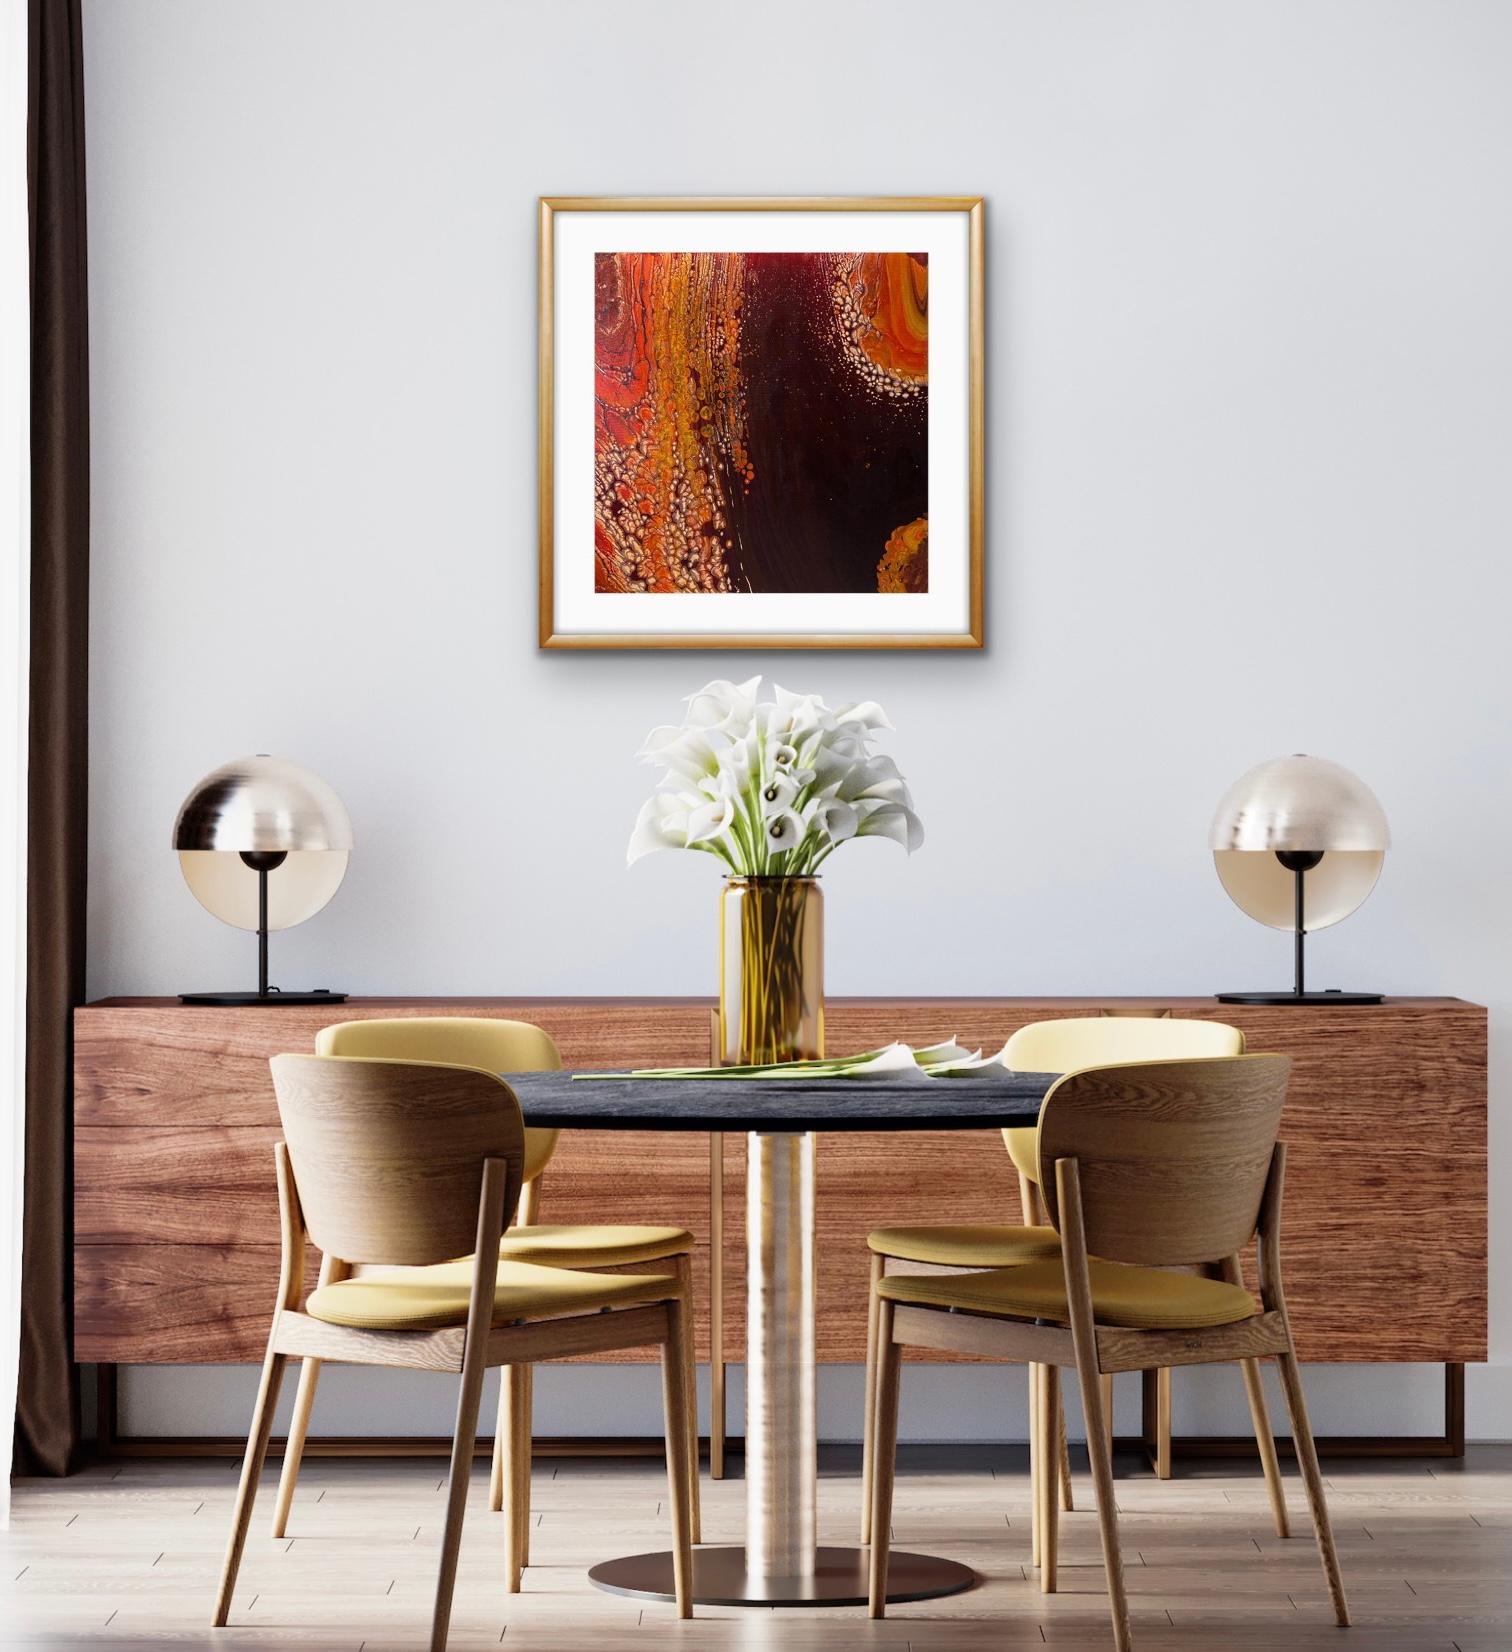 The Copper Necklace - Brown Abstract Painting by Almas Kabani